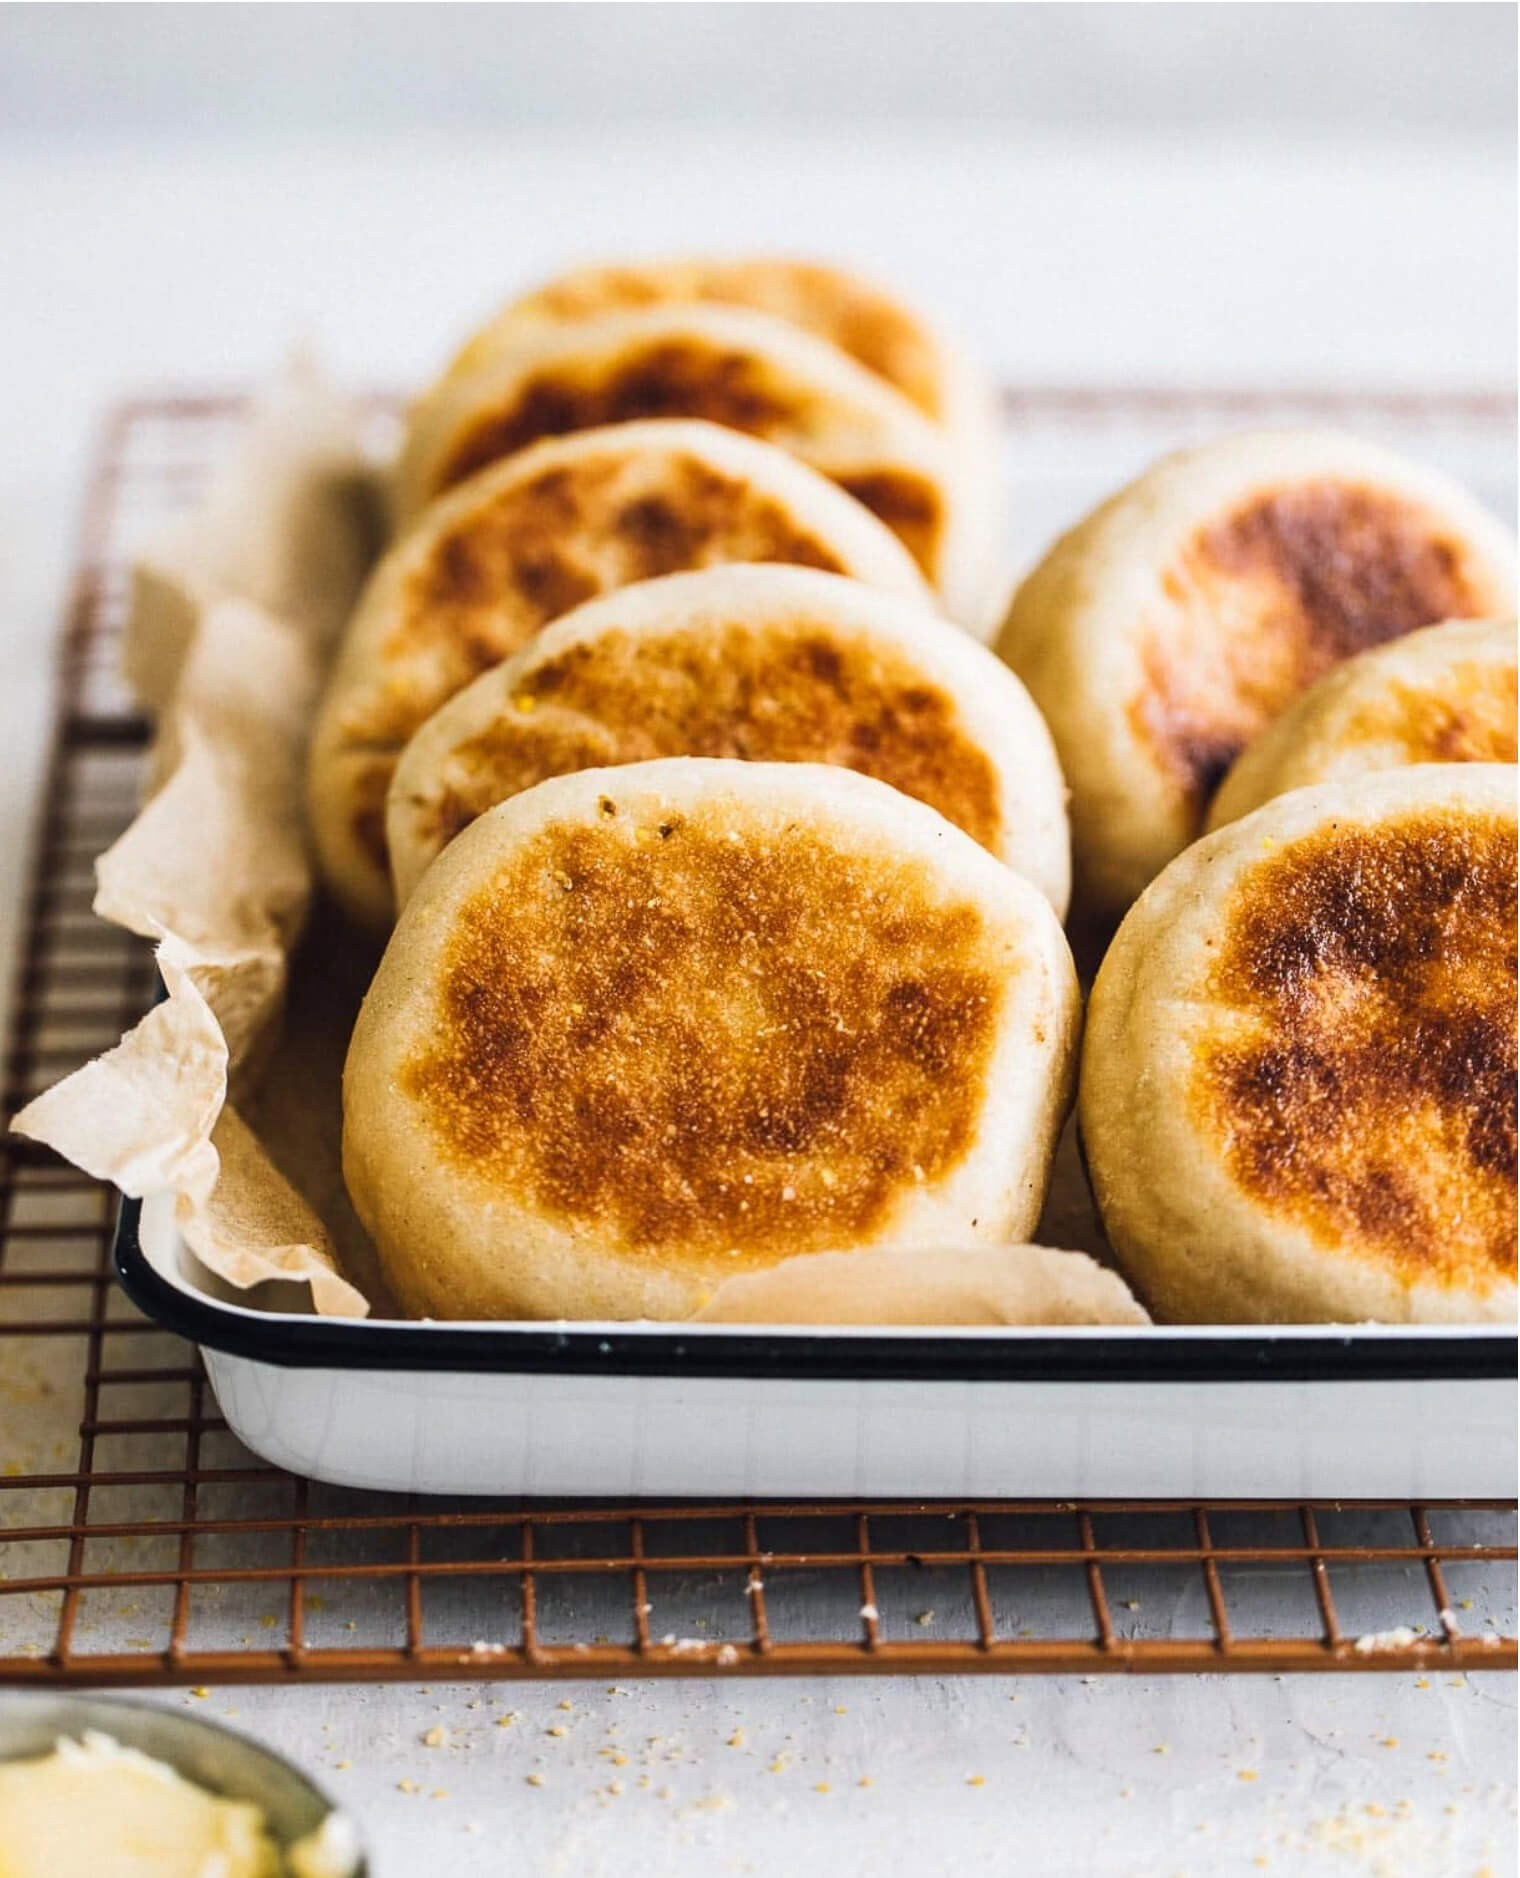 Homemade golden brown Sourdough English Muffins made on the griddle. 